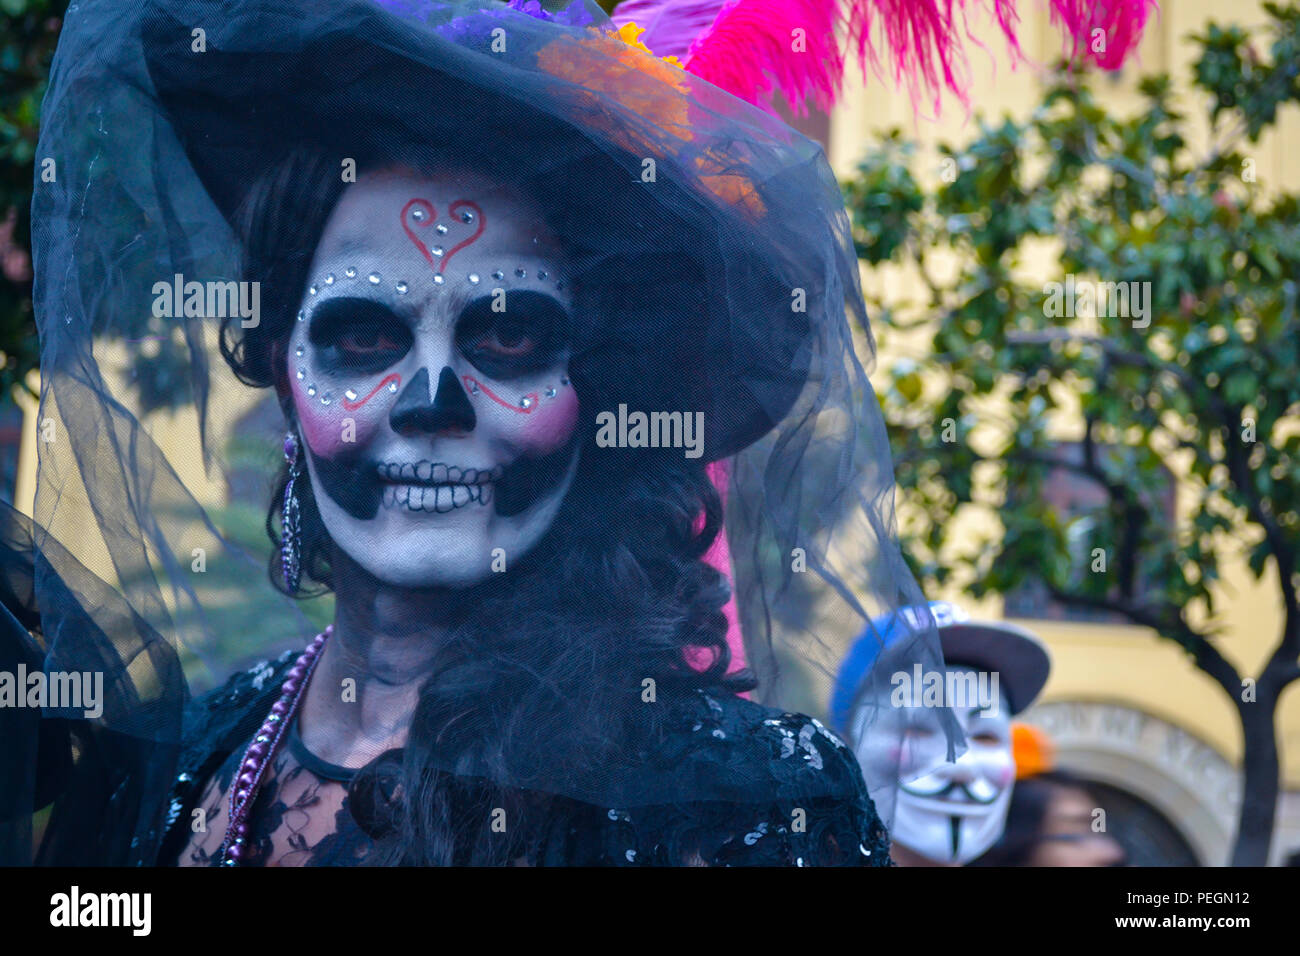 Mexico City, Mexico, ; November 1 2015: Portrait of a woman in disguise at the Day of the Dead celebration in Mexico City Stock Photo